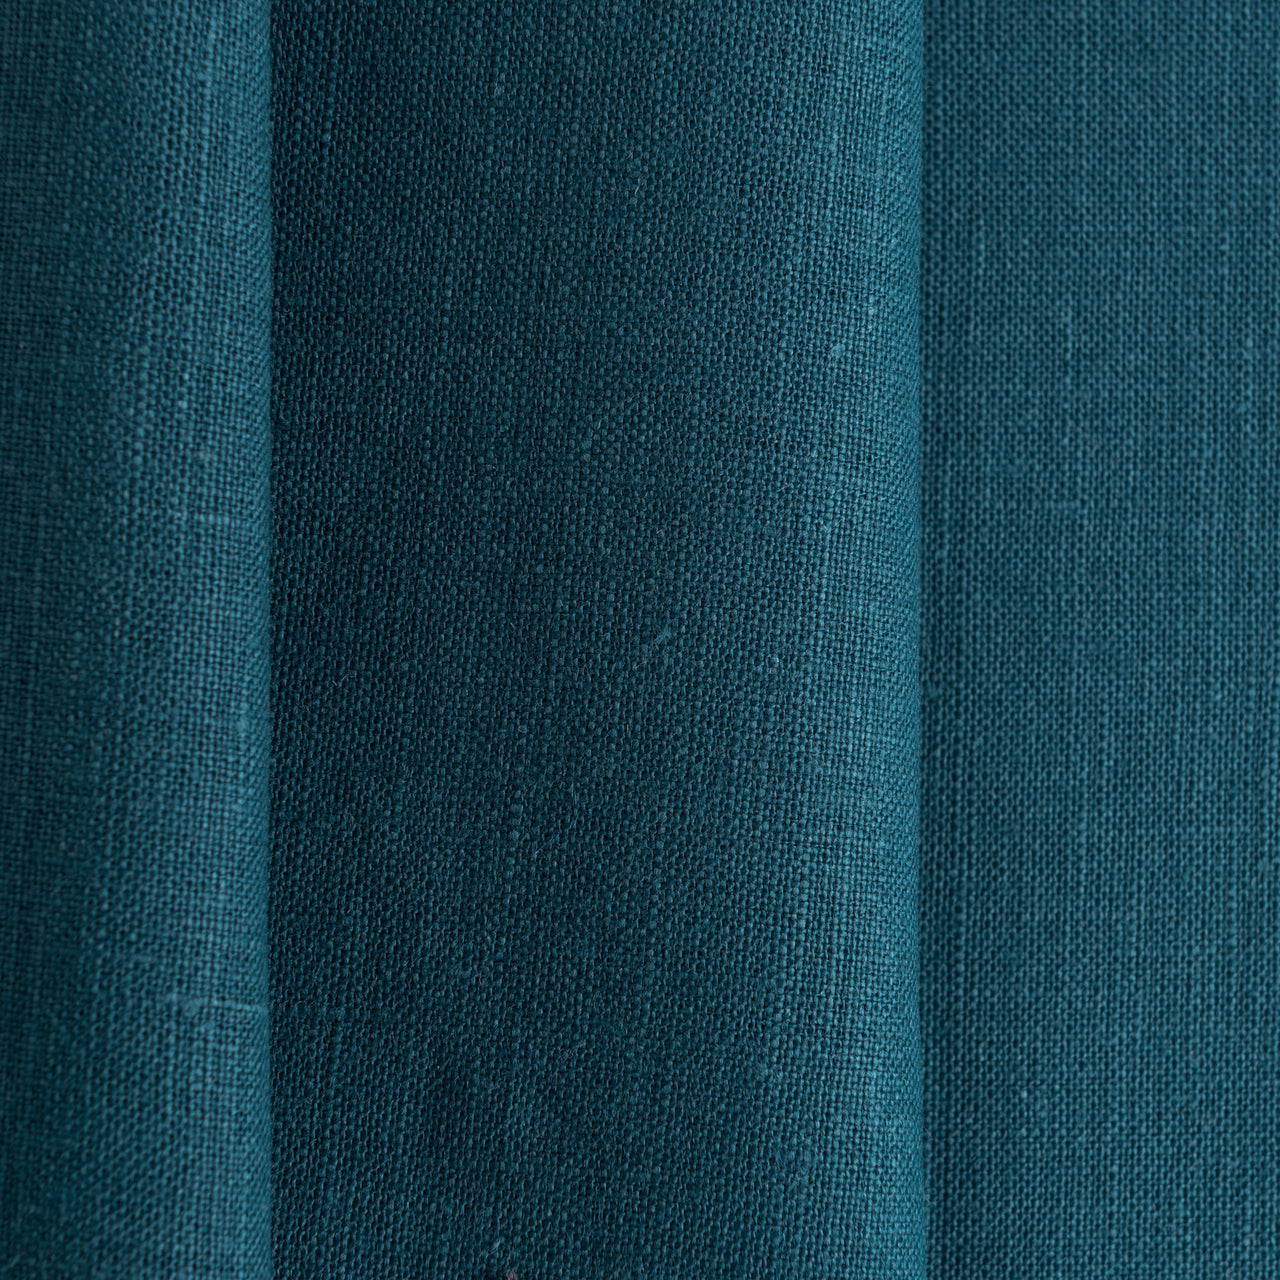 Peacock Blue Linen Fabric by the Yard - 100% French Natural - Width 52”- 106”